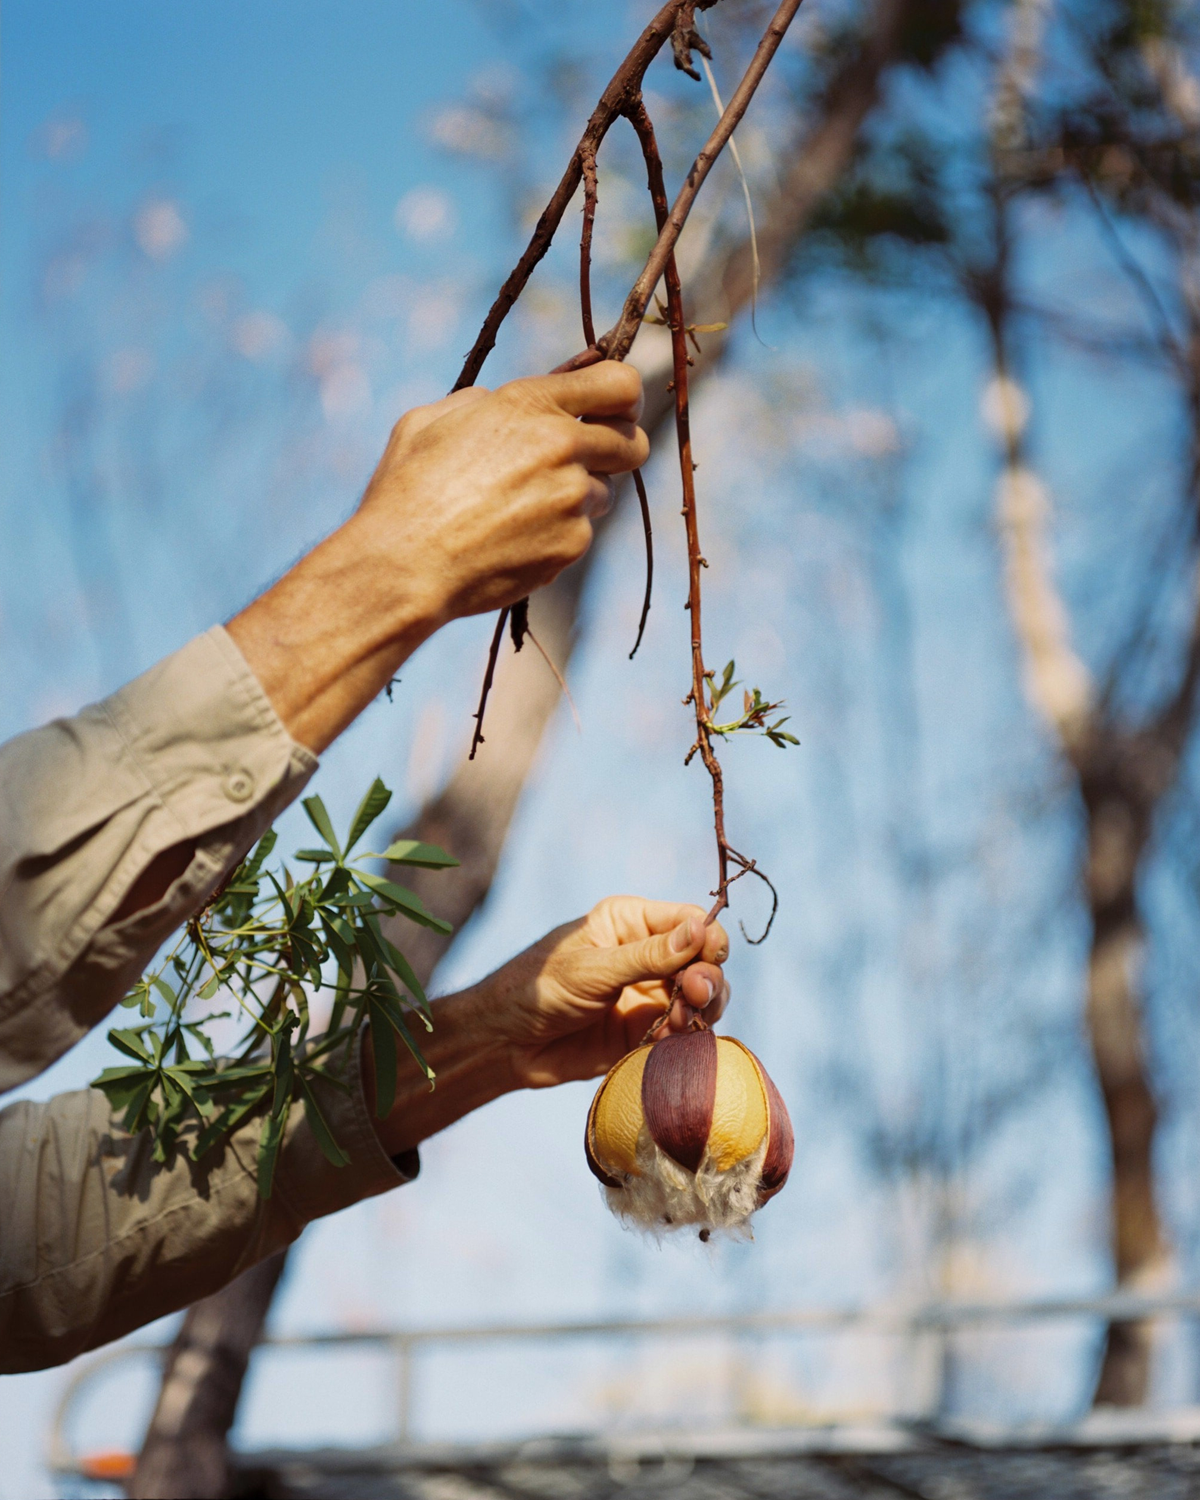 Colour photograph depicting man's hands picking seed pod off tree against blue sky.